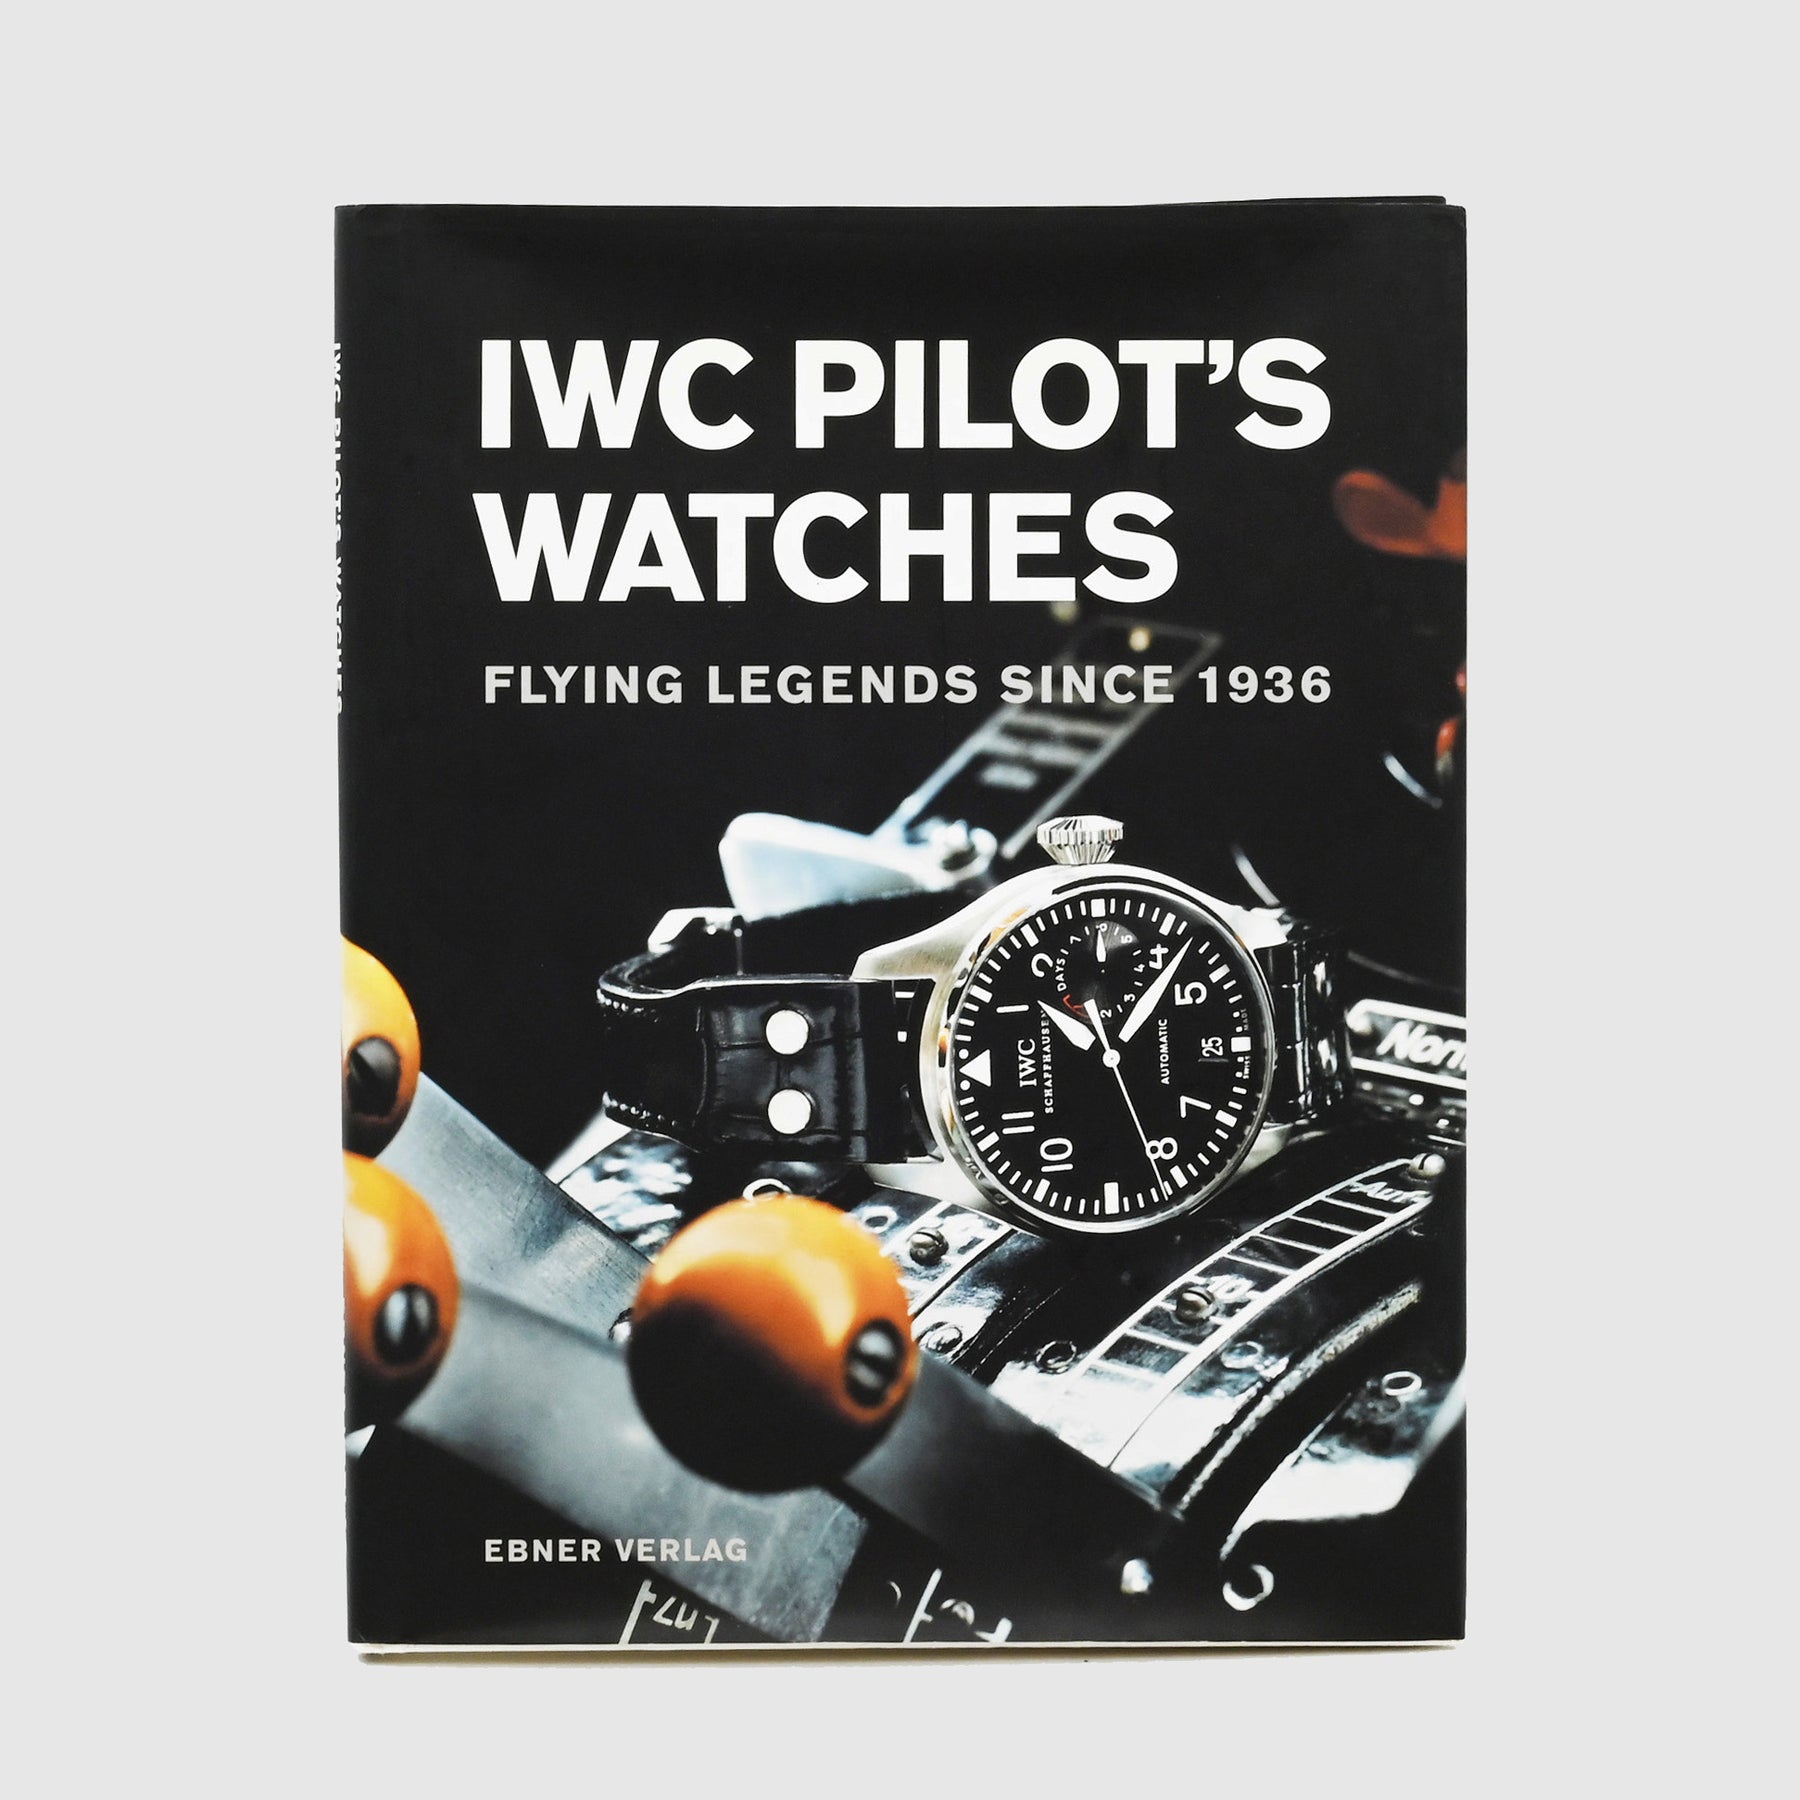 IWC Pilot Watches Flying Legends Since 1936